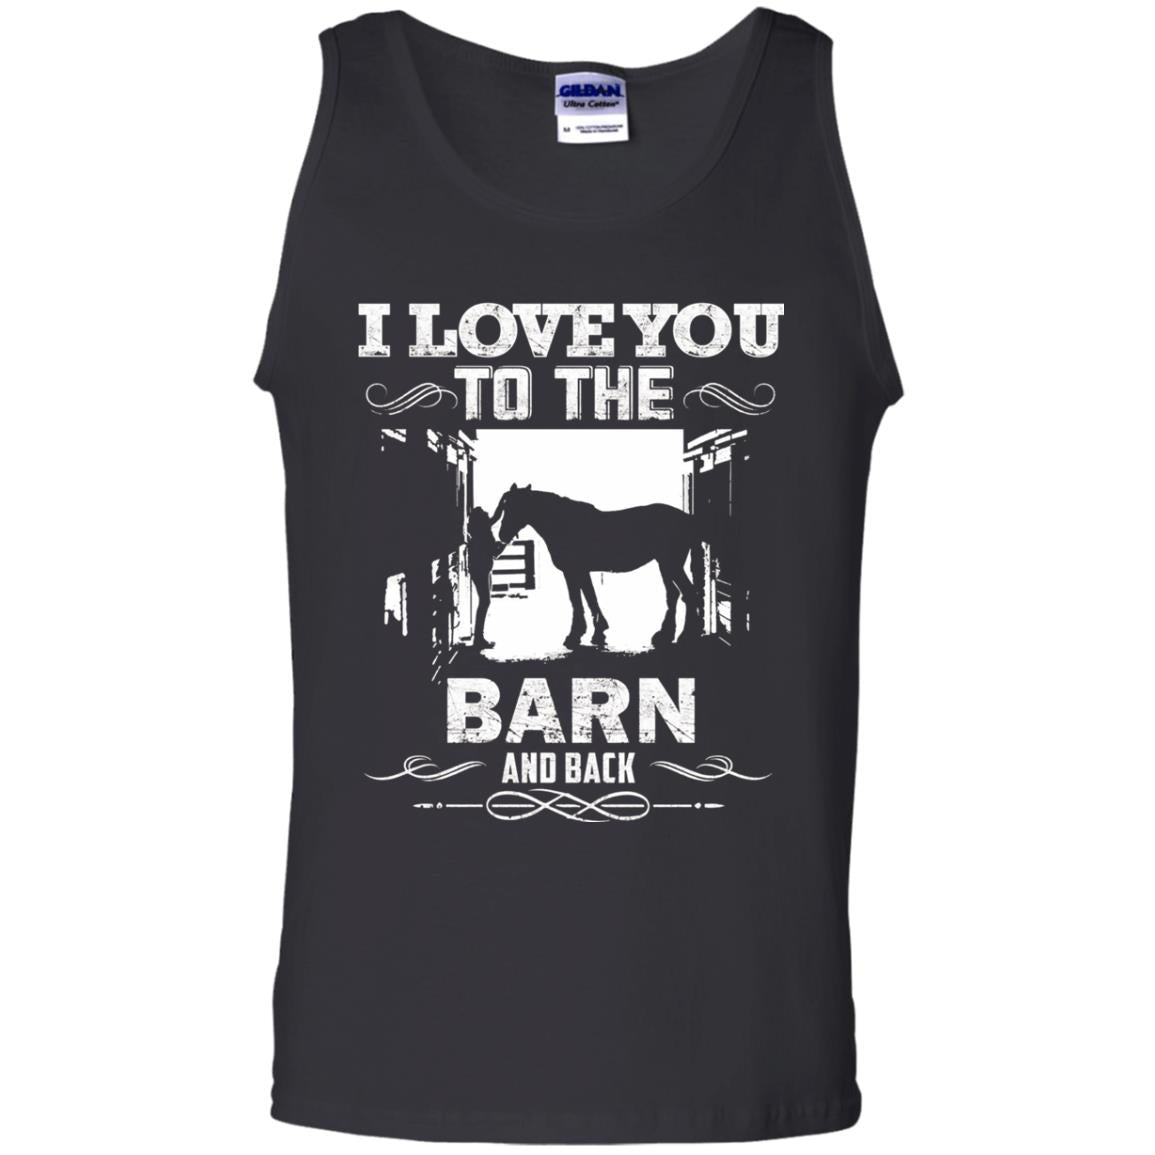 To The Barn And Back Horse Lover Riding Shirt